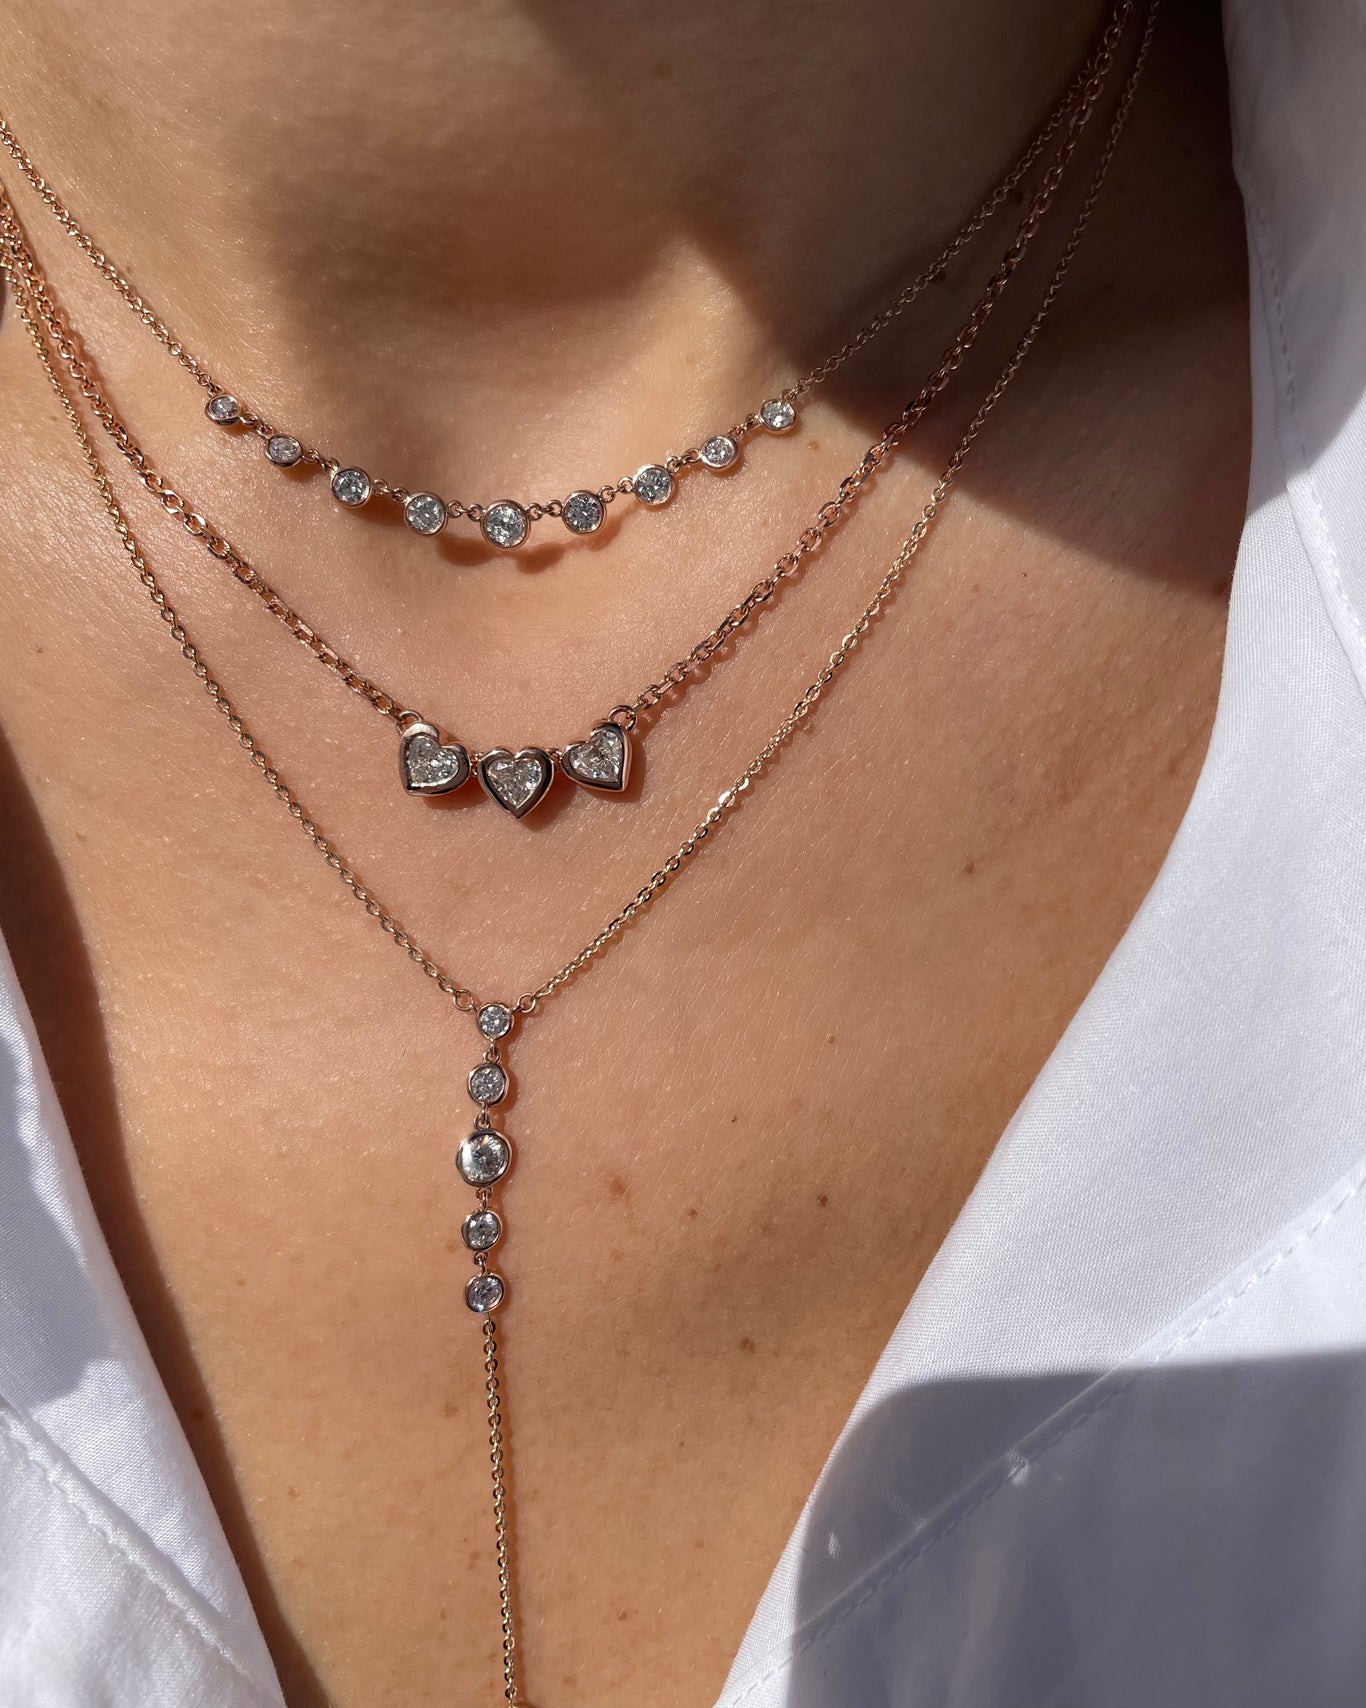 Bezel Lariat Necklace shown with the 3 Hearts Necklace and Bezel Mini Starstruck Necklace